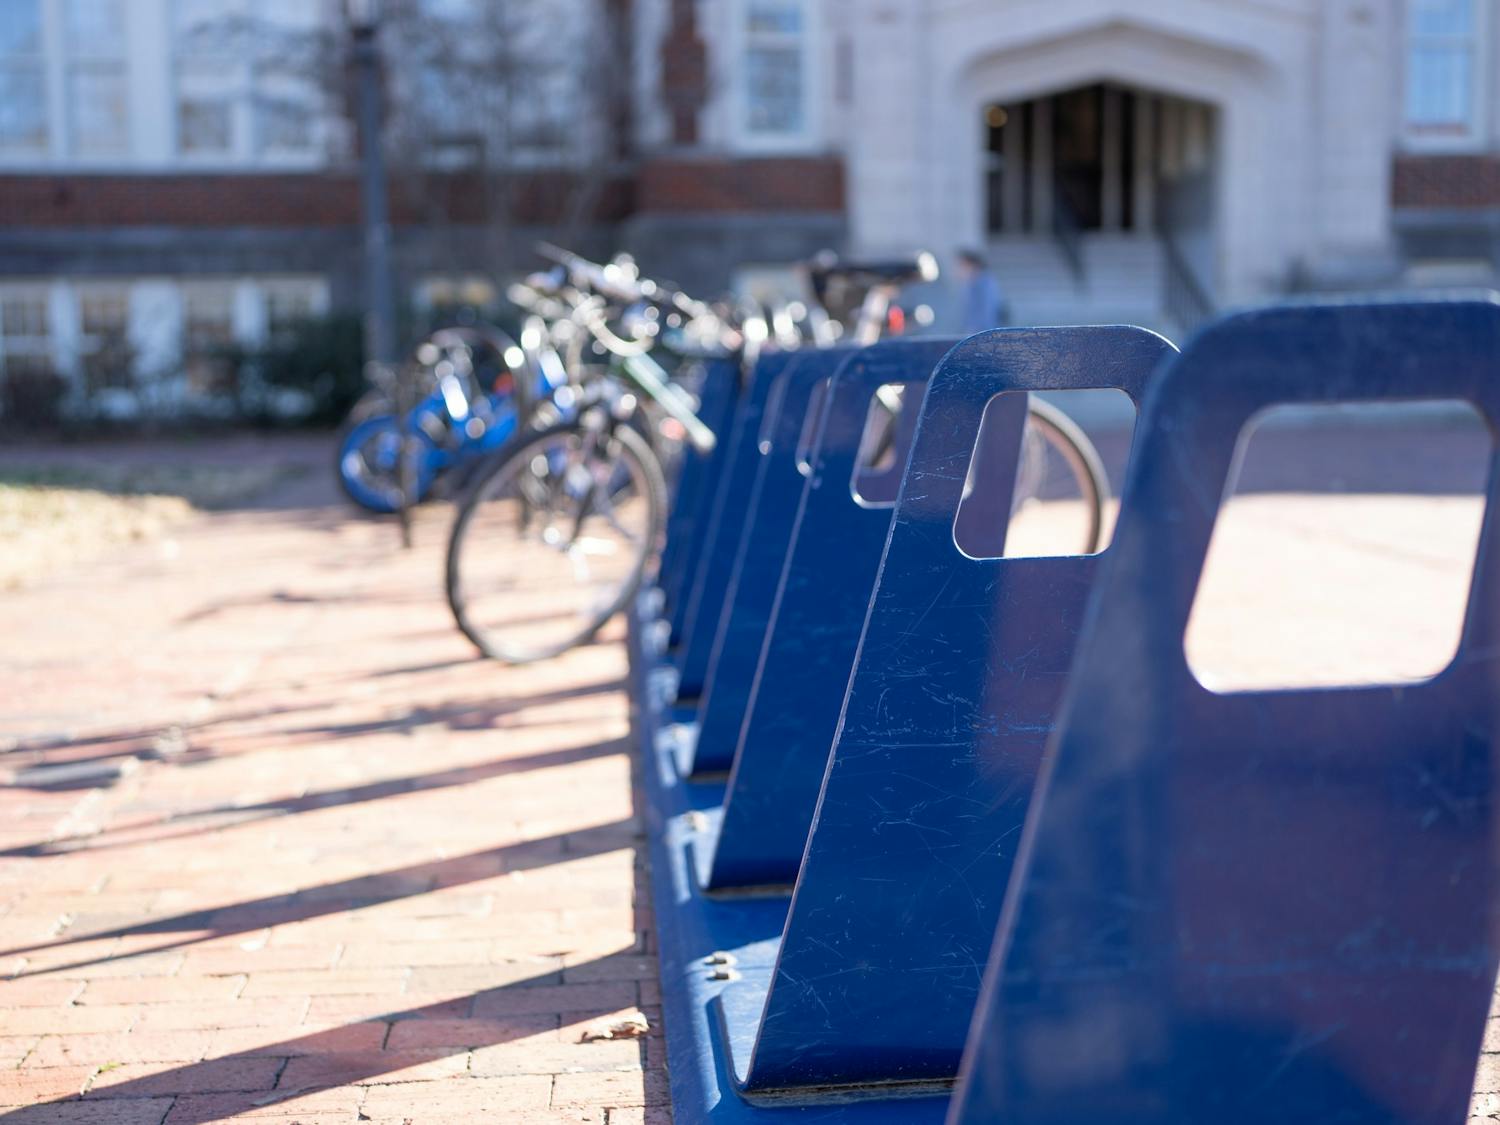 One of the bicycle racks where the Tar Heel Bikes are normally found is pictured in front of Peabody Hall on Tuesday, Jan. 26, 2023.